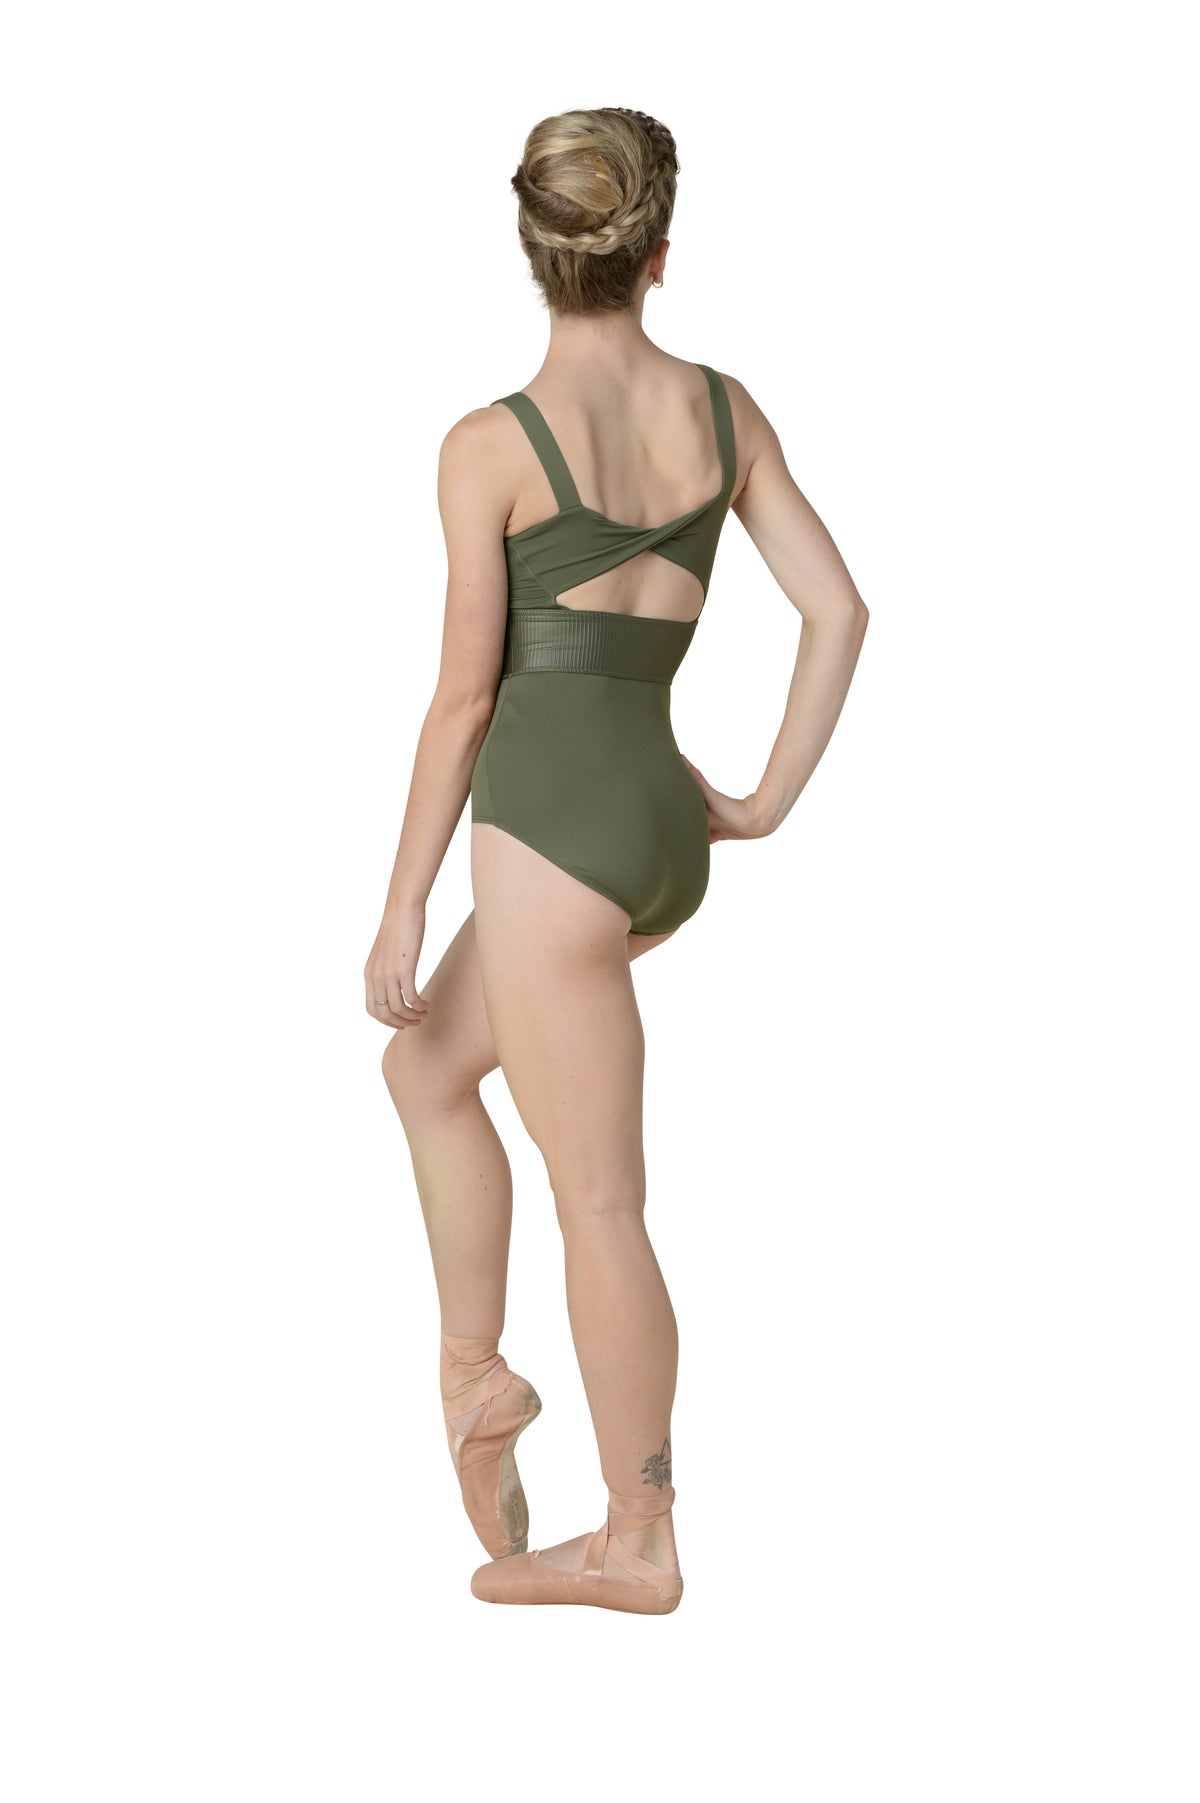 Dan Button Down Bodysuit in Olive just unpacked !! Gorgeous soft